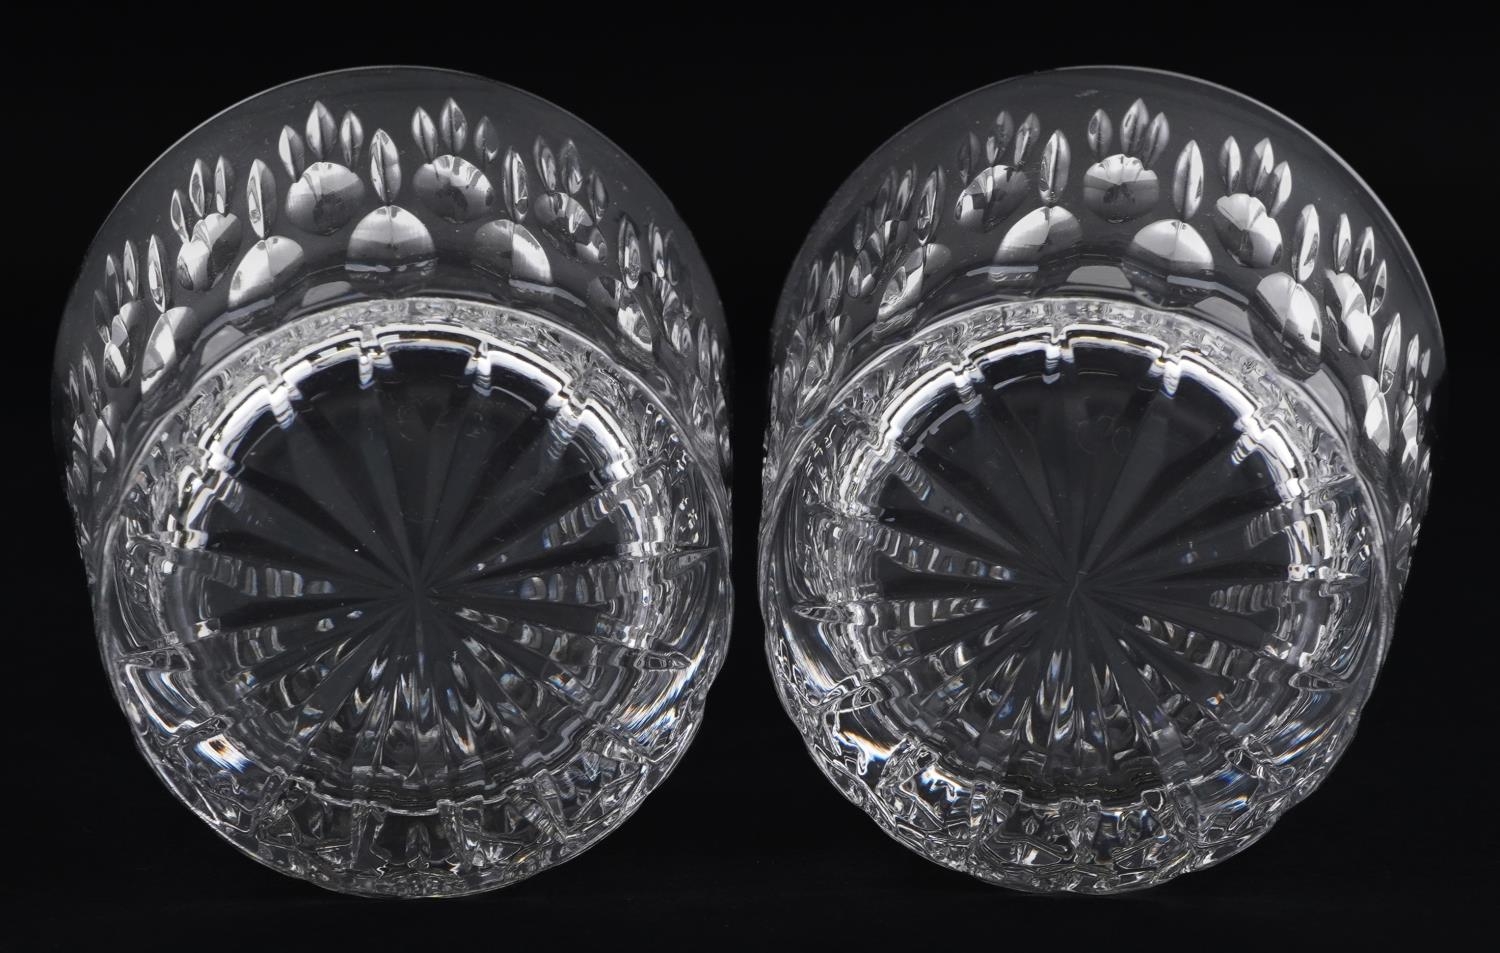 Pair of Harrods crystal glasses housed in a fitted box, each glass 8cm high - Image 6 of 7